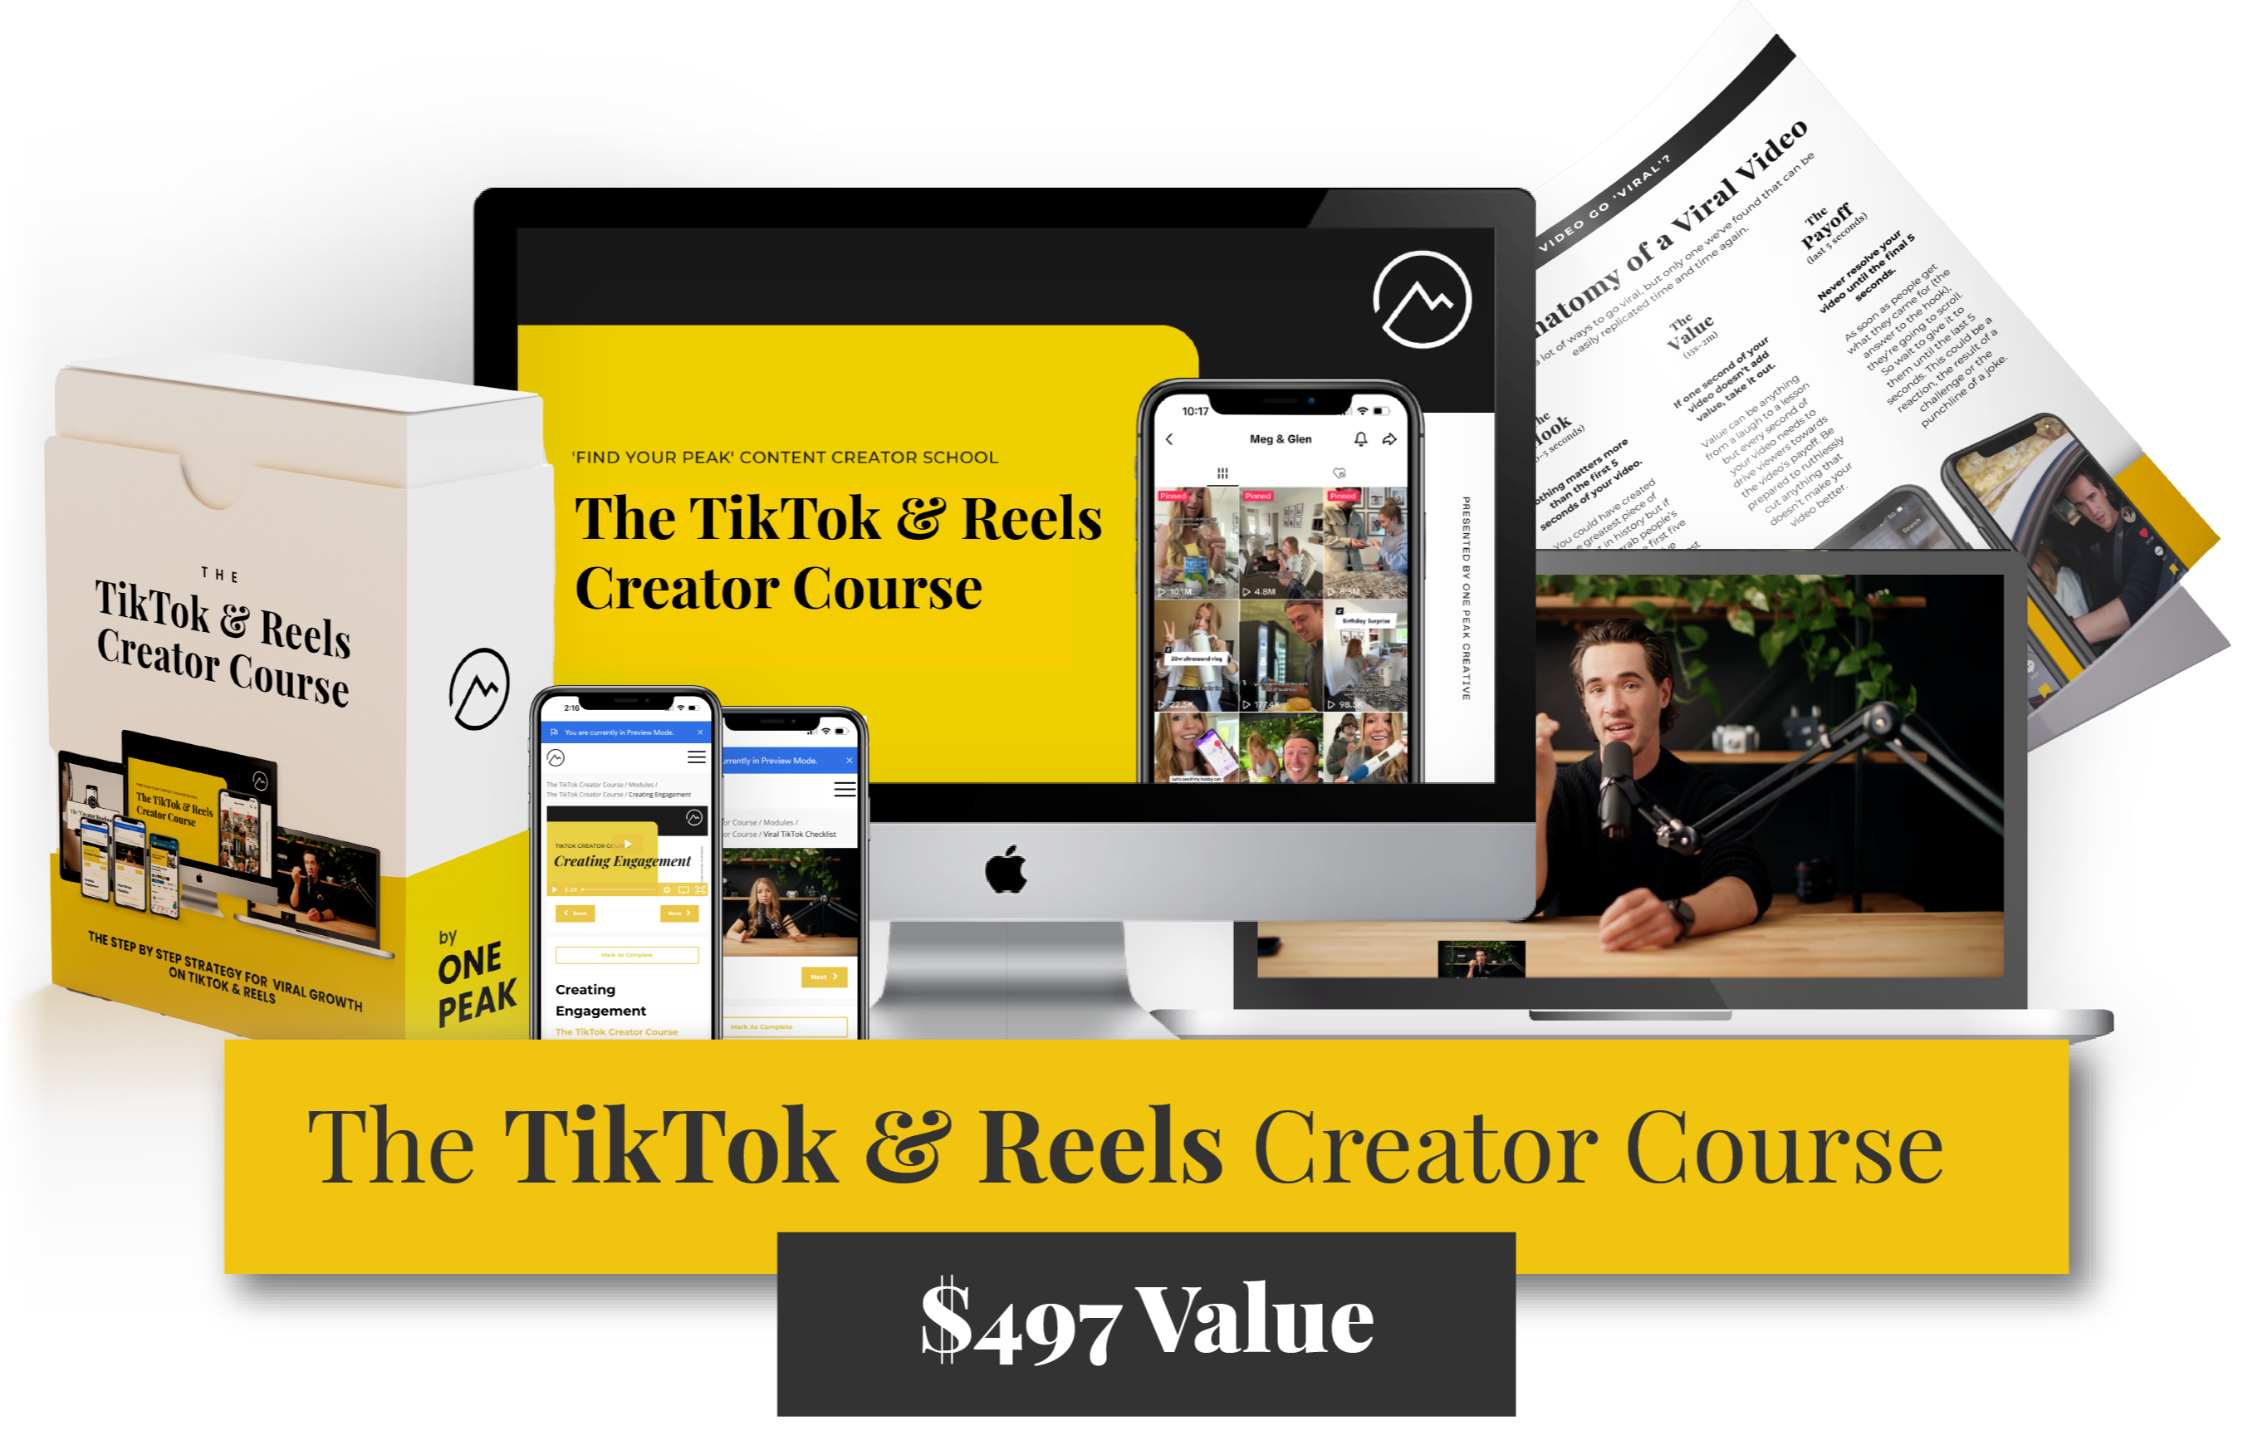 You are currently viewing One Peak Creative Agency – The Tiktok and Reels Creator Course